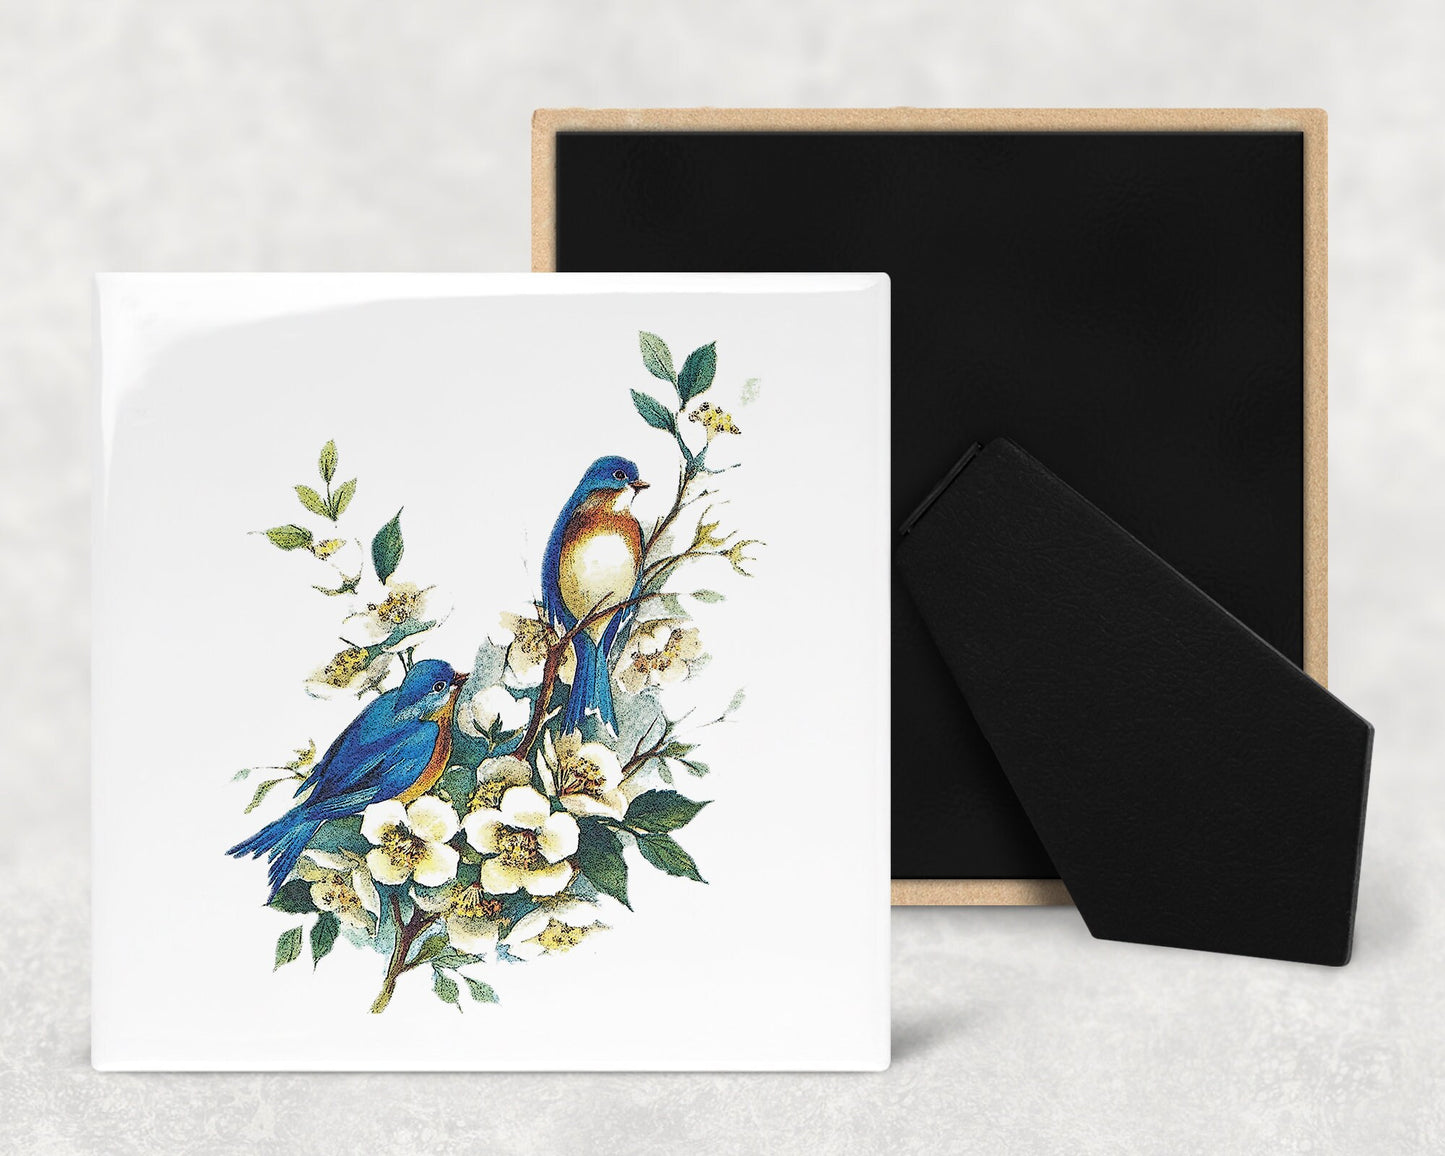 Bluebirds Decorative Ceramic Tile with Optional Easel Back - Available in 3 Sizes